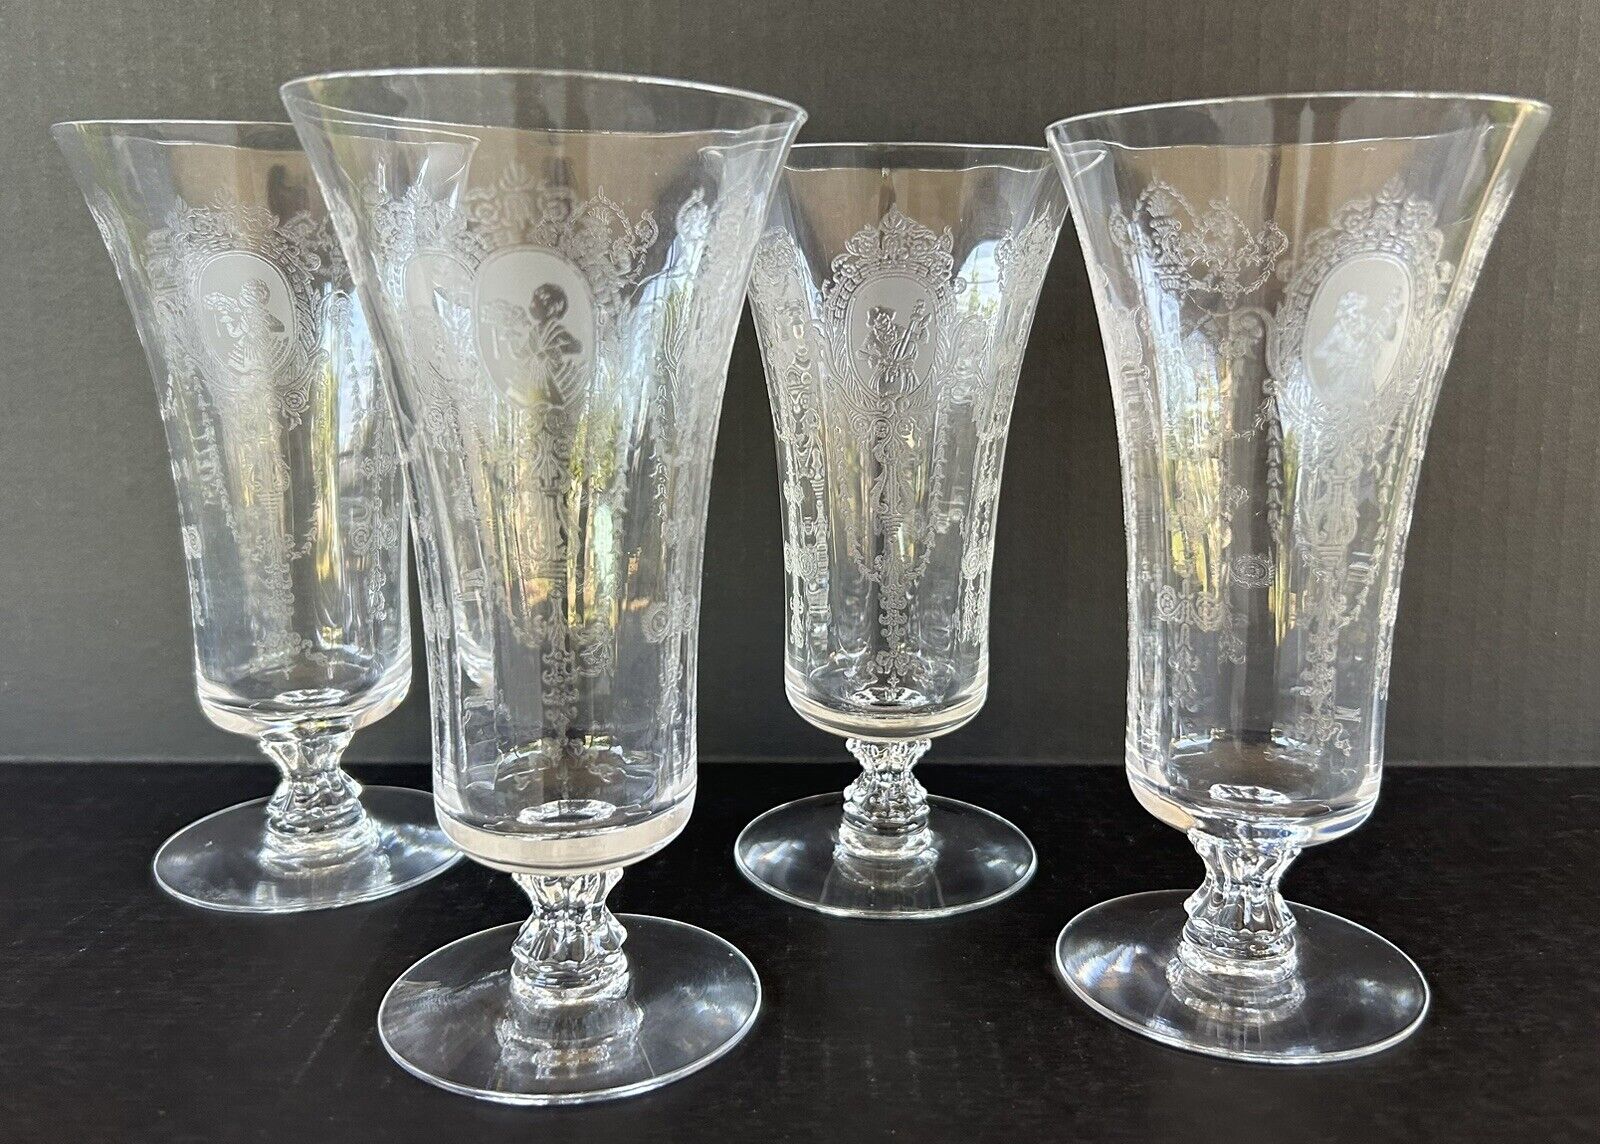 Heisey Glass Etched Minuet Iced Tea Glasses 6 7/8” Set of 4